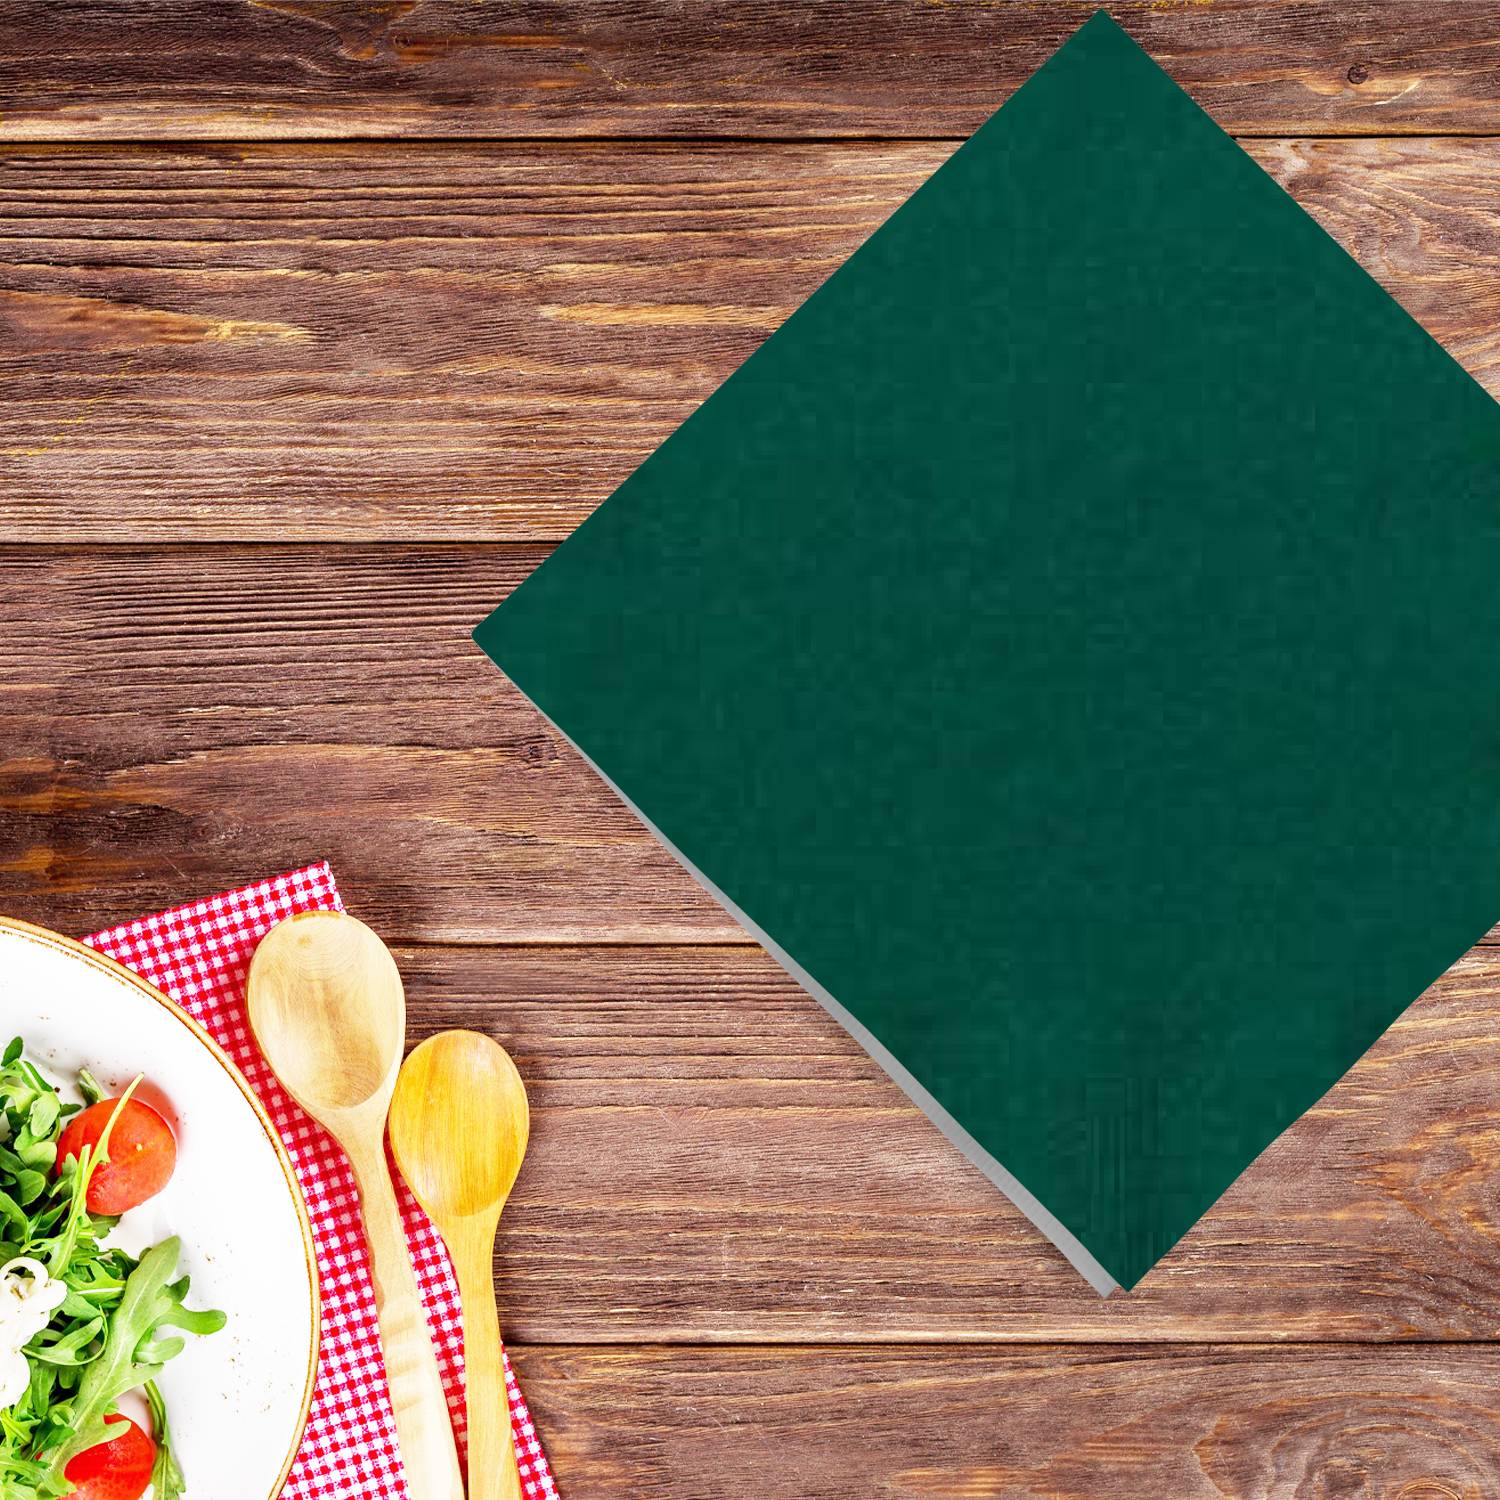 SALE Hunter Green Beverage Napkins 24 count  Party Dimensions   